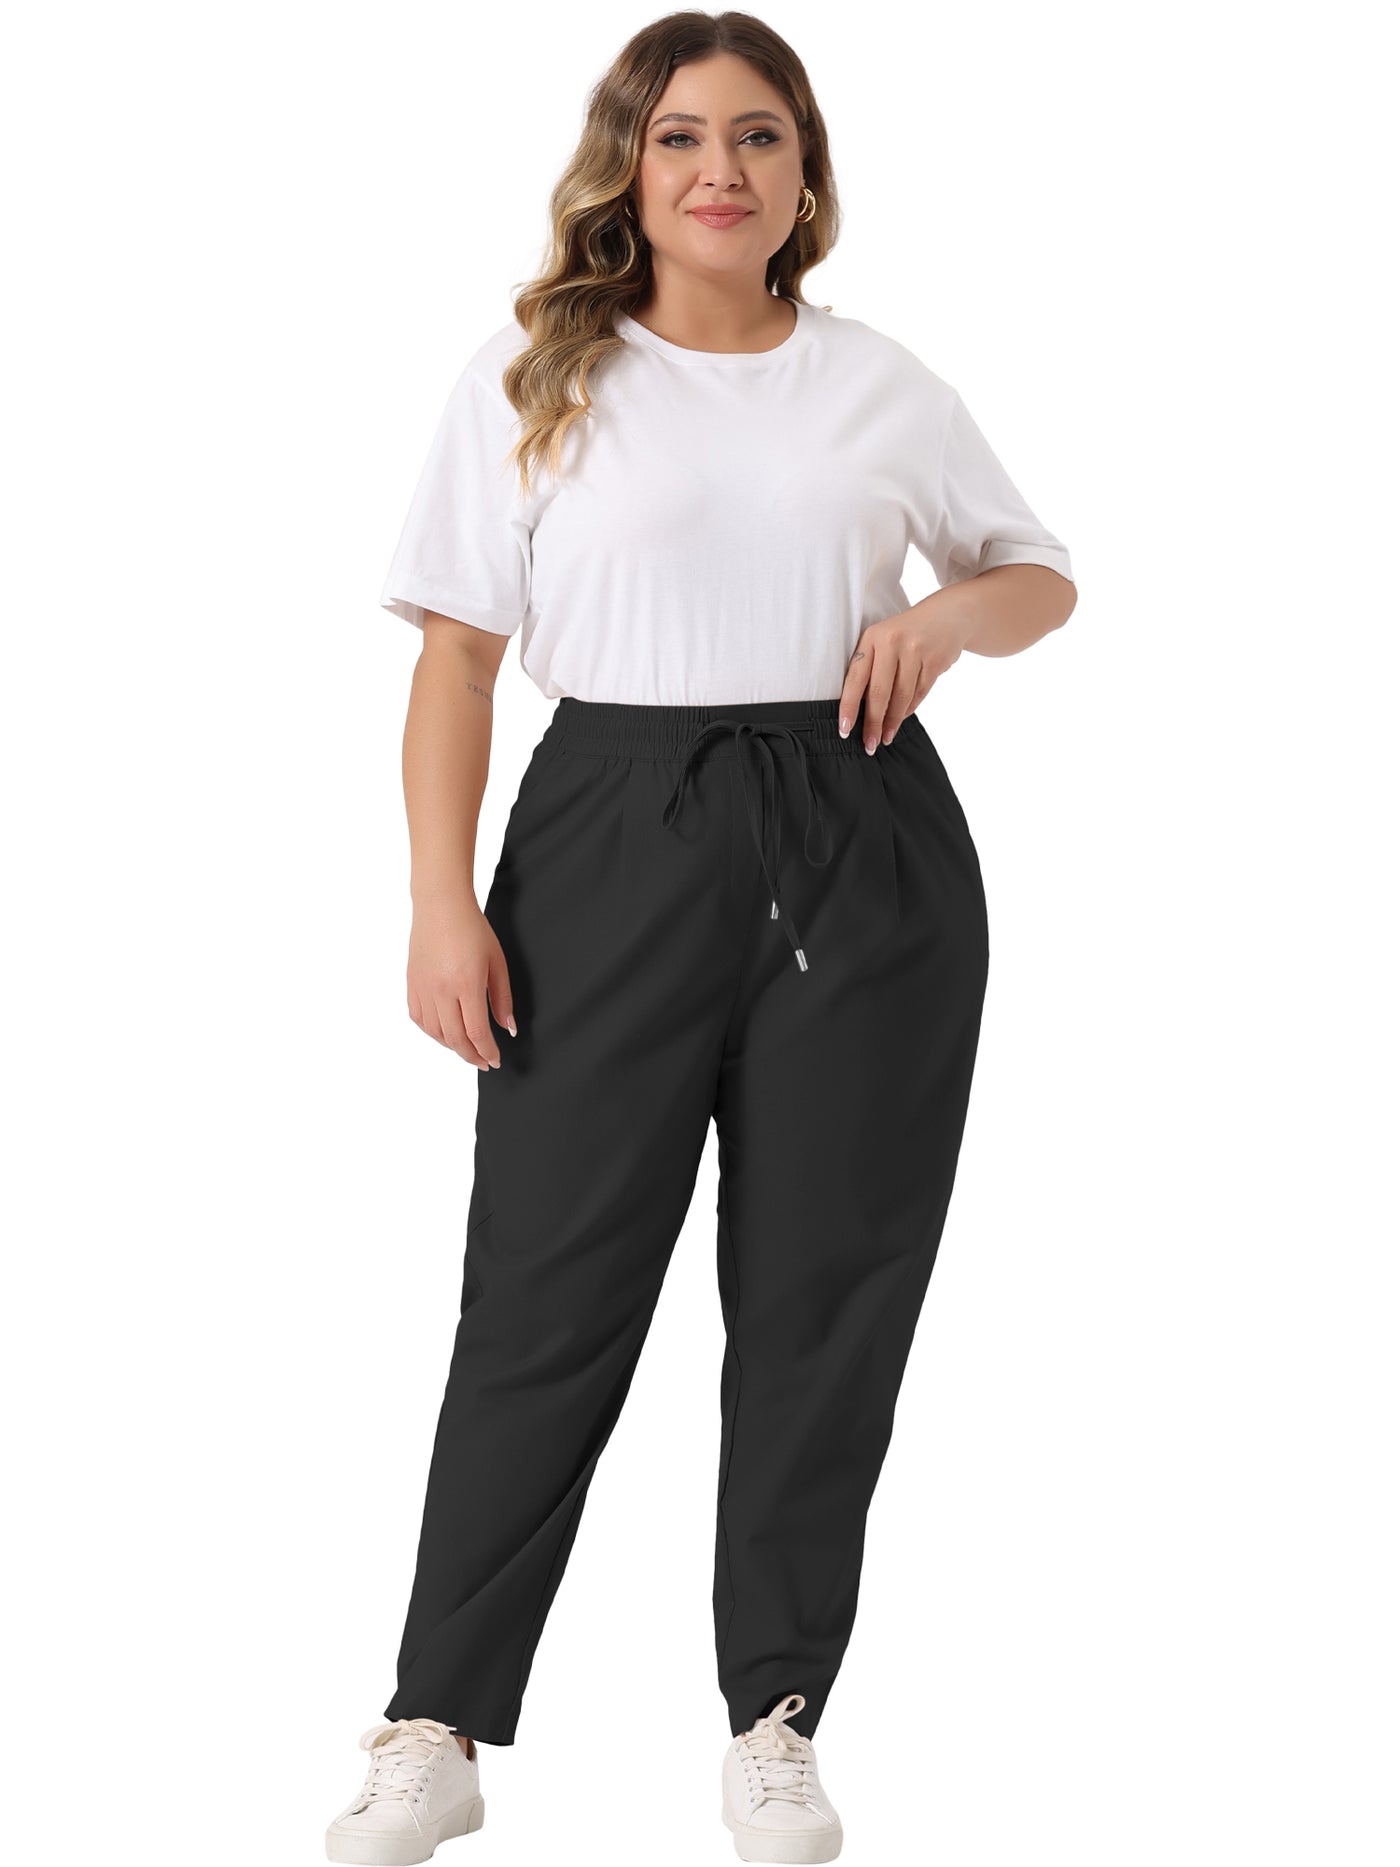 Bublédon Plus Size Pants for Women Straight Leg Drawstring Elastic Loose Comfy Trousers with Pockets